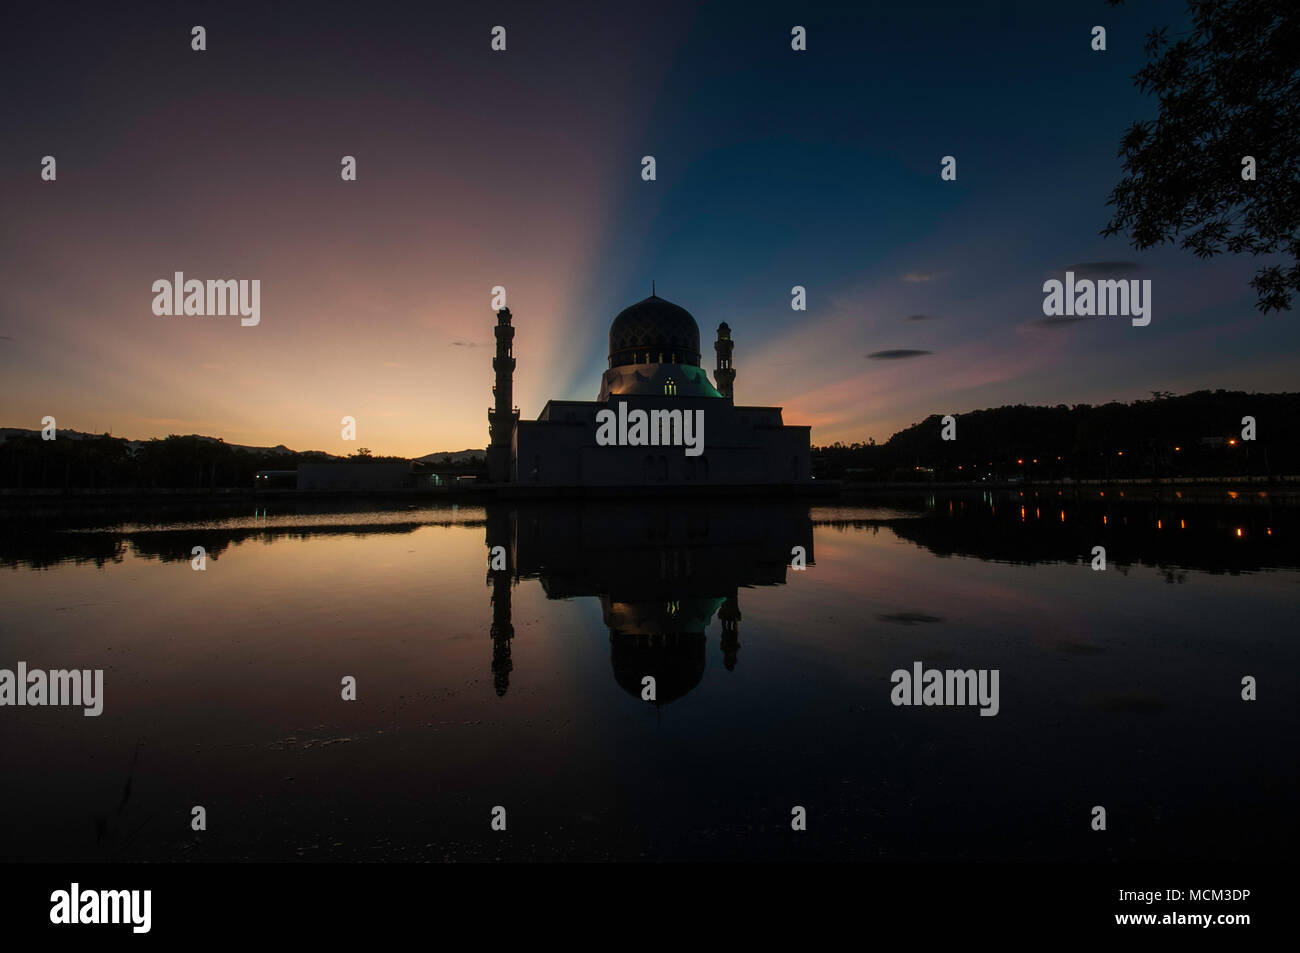 Sunrise with ray of lights by the 'Floating Mosque' in Likas, Kota Kinabalu, Sabah. Stock Photo